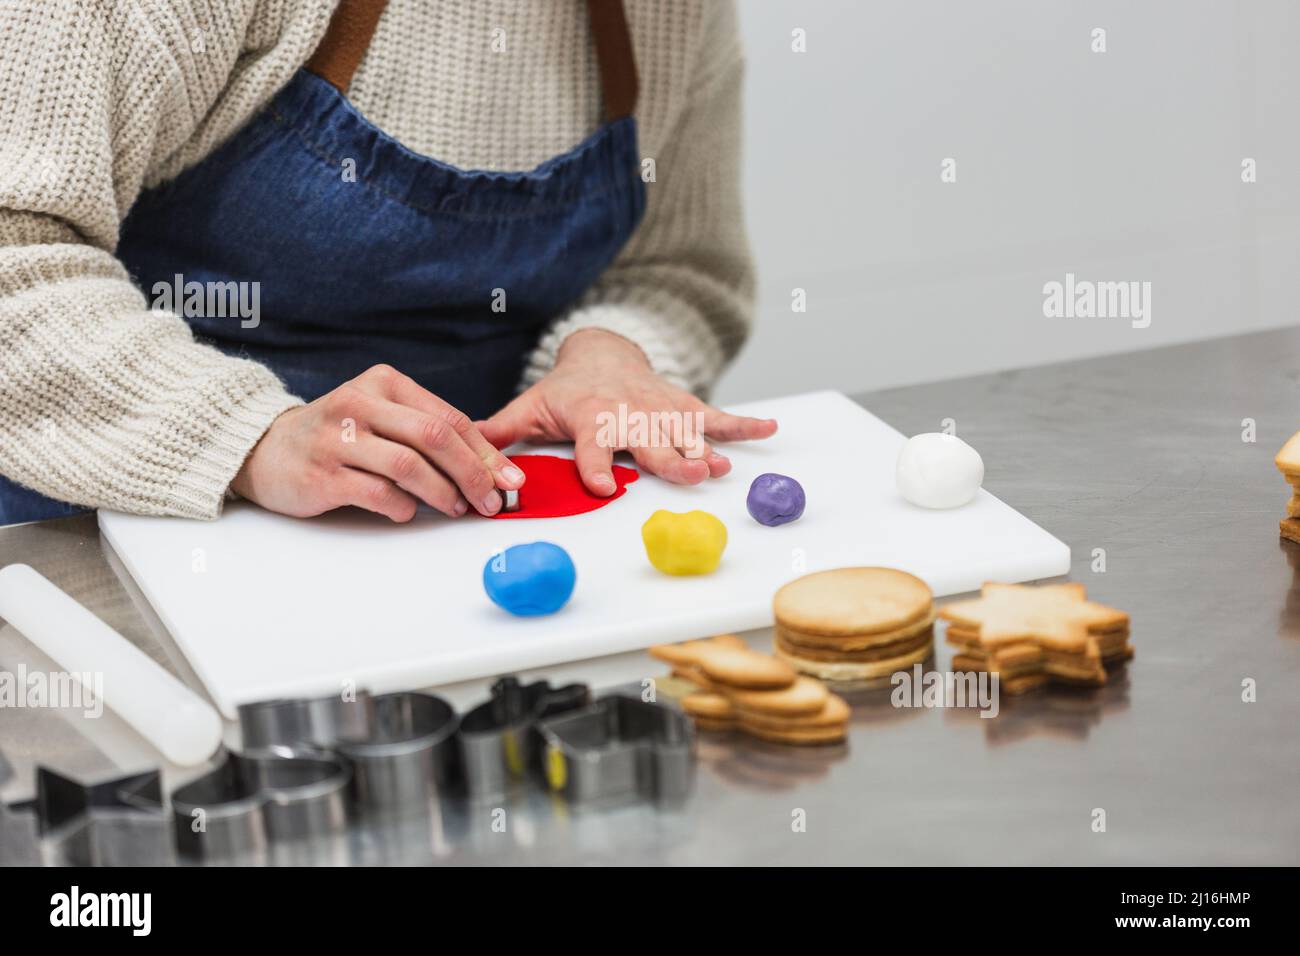 Crop baker cutting colorful gum paste in bakery Stock Photo